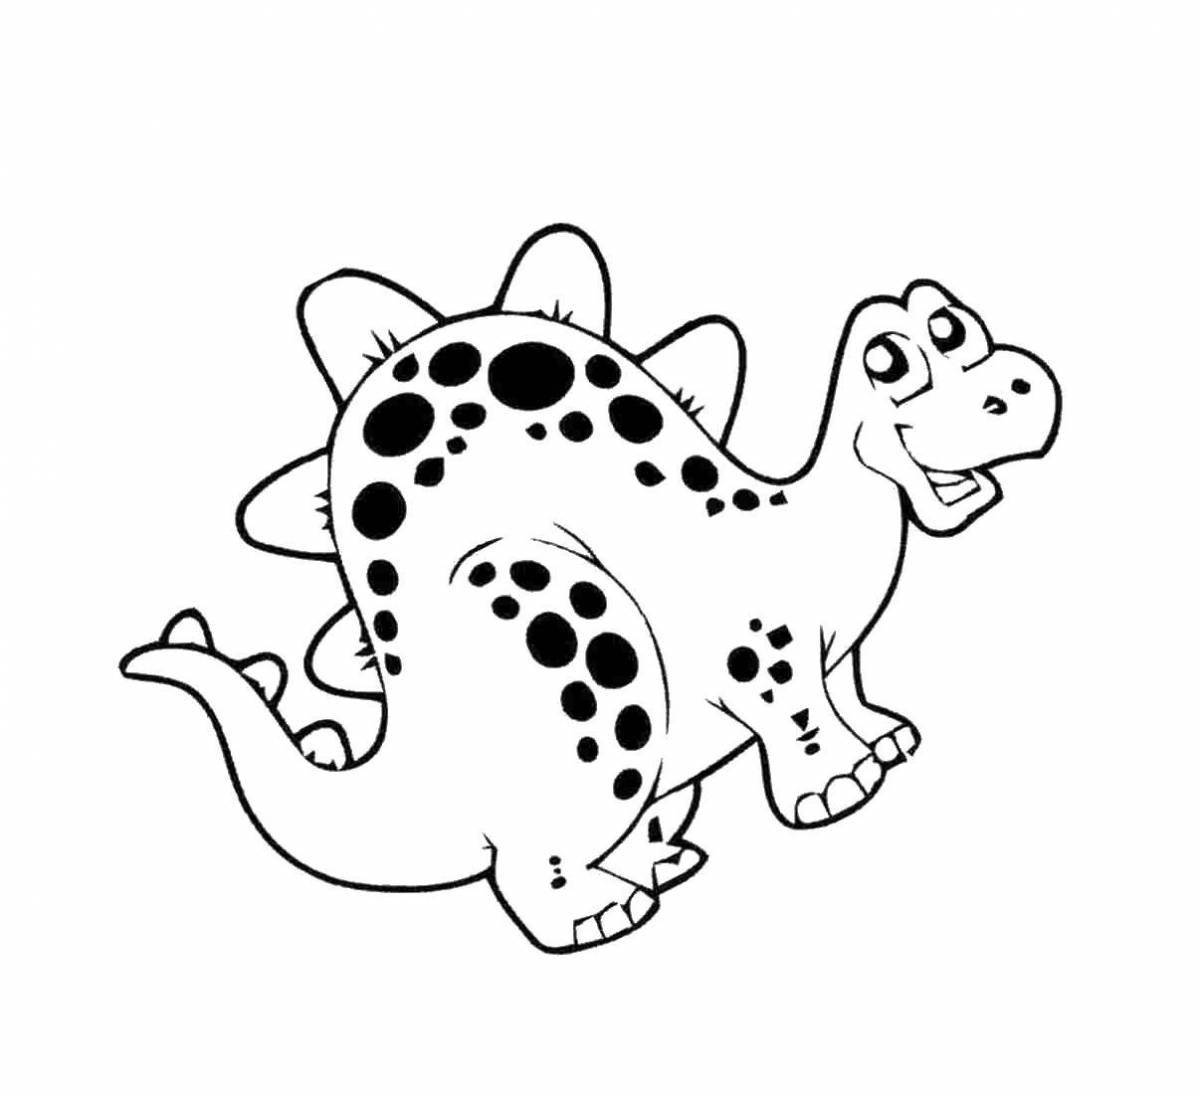 Colorful dinosaurs coloring pages for kids